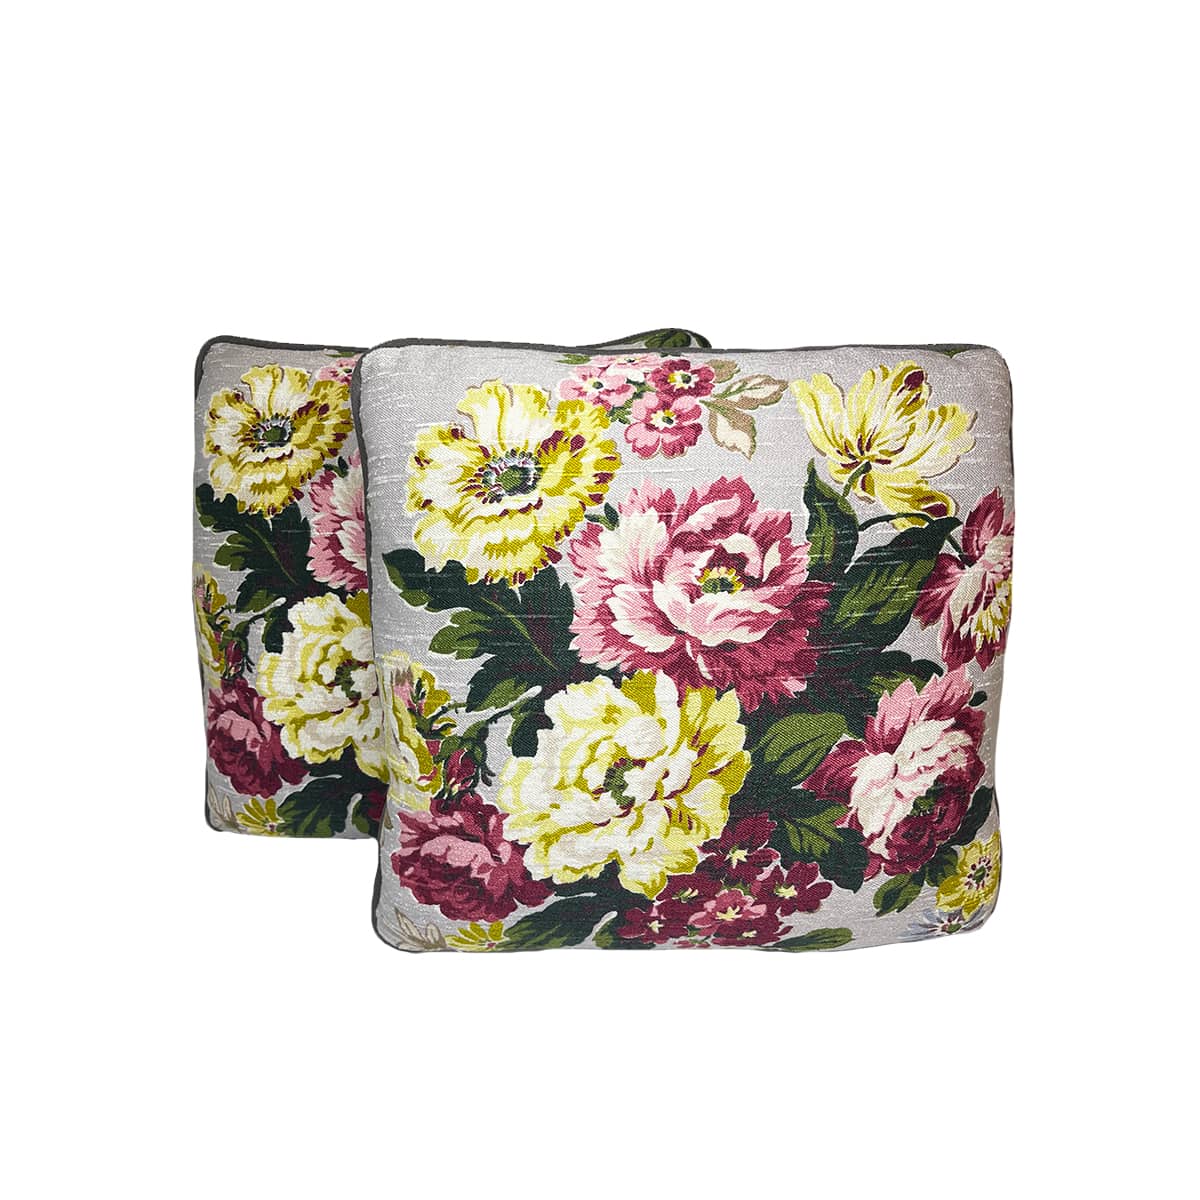 In Bloom – Single Pillow, Pair available